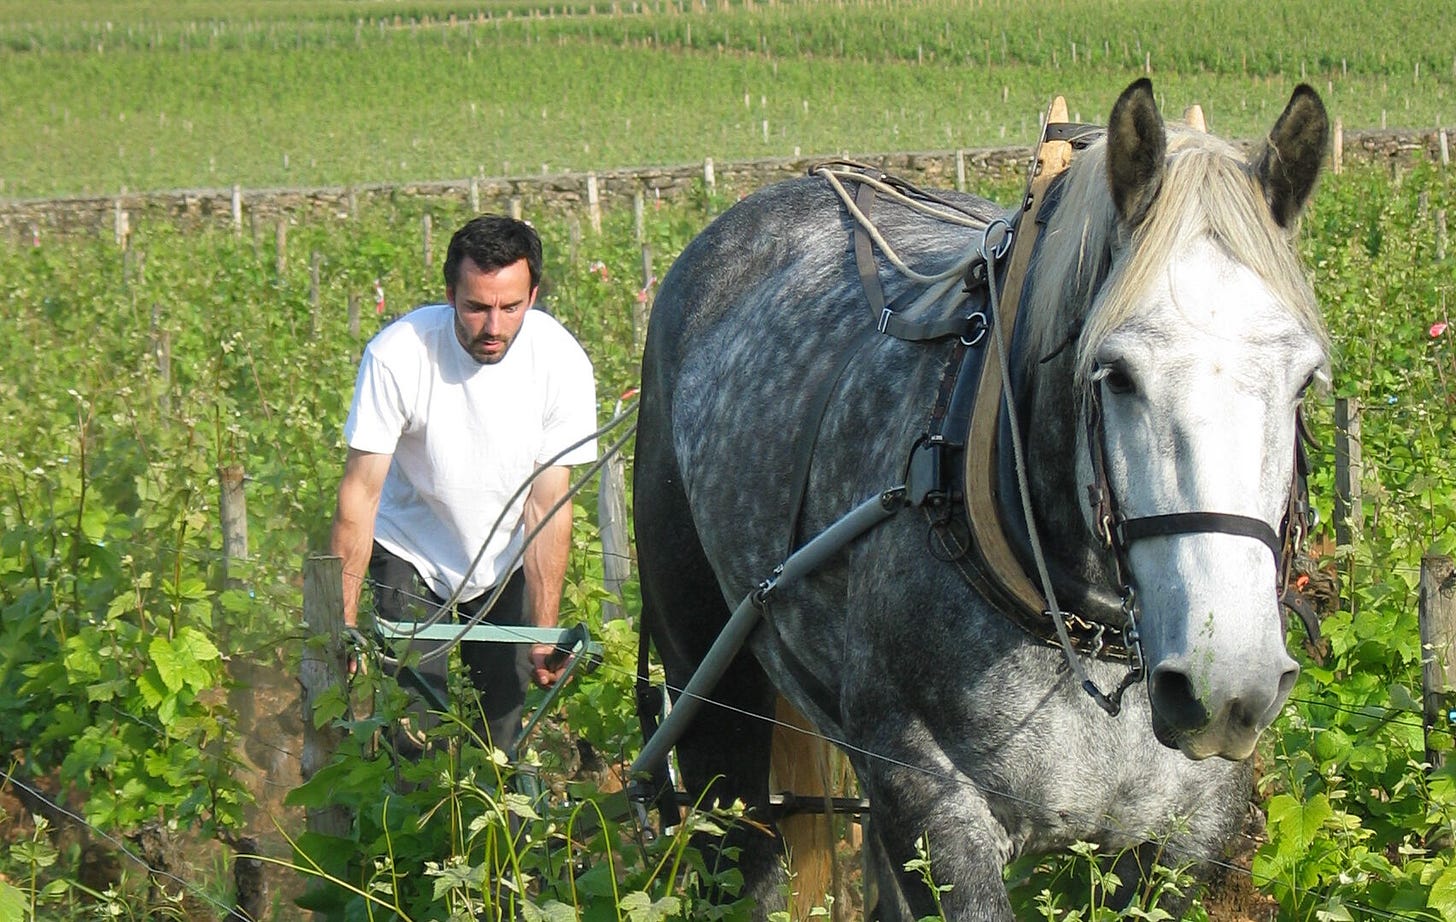 Oronce de Beler in Burgundy with his Percheron draft horse in 2009 (he ceased this activity in 2015). Photo courtesy La Maison Romane.